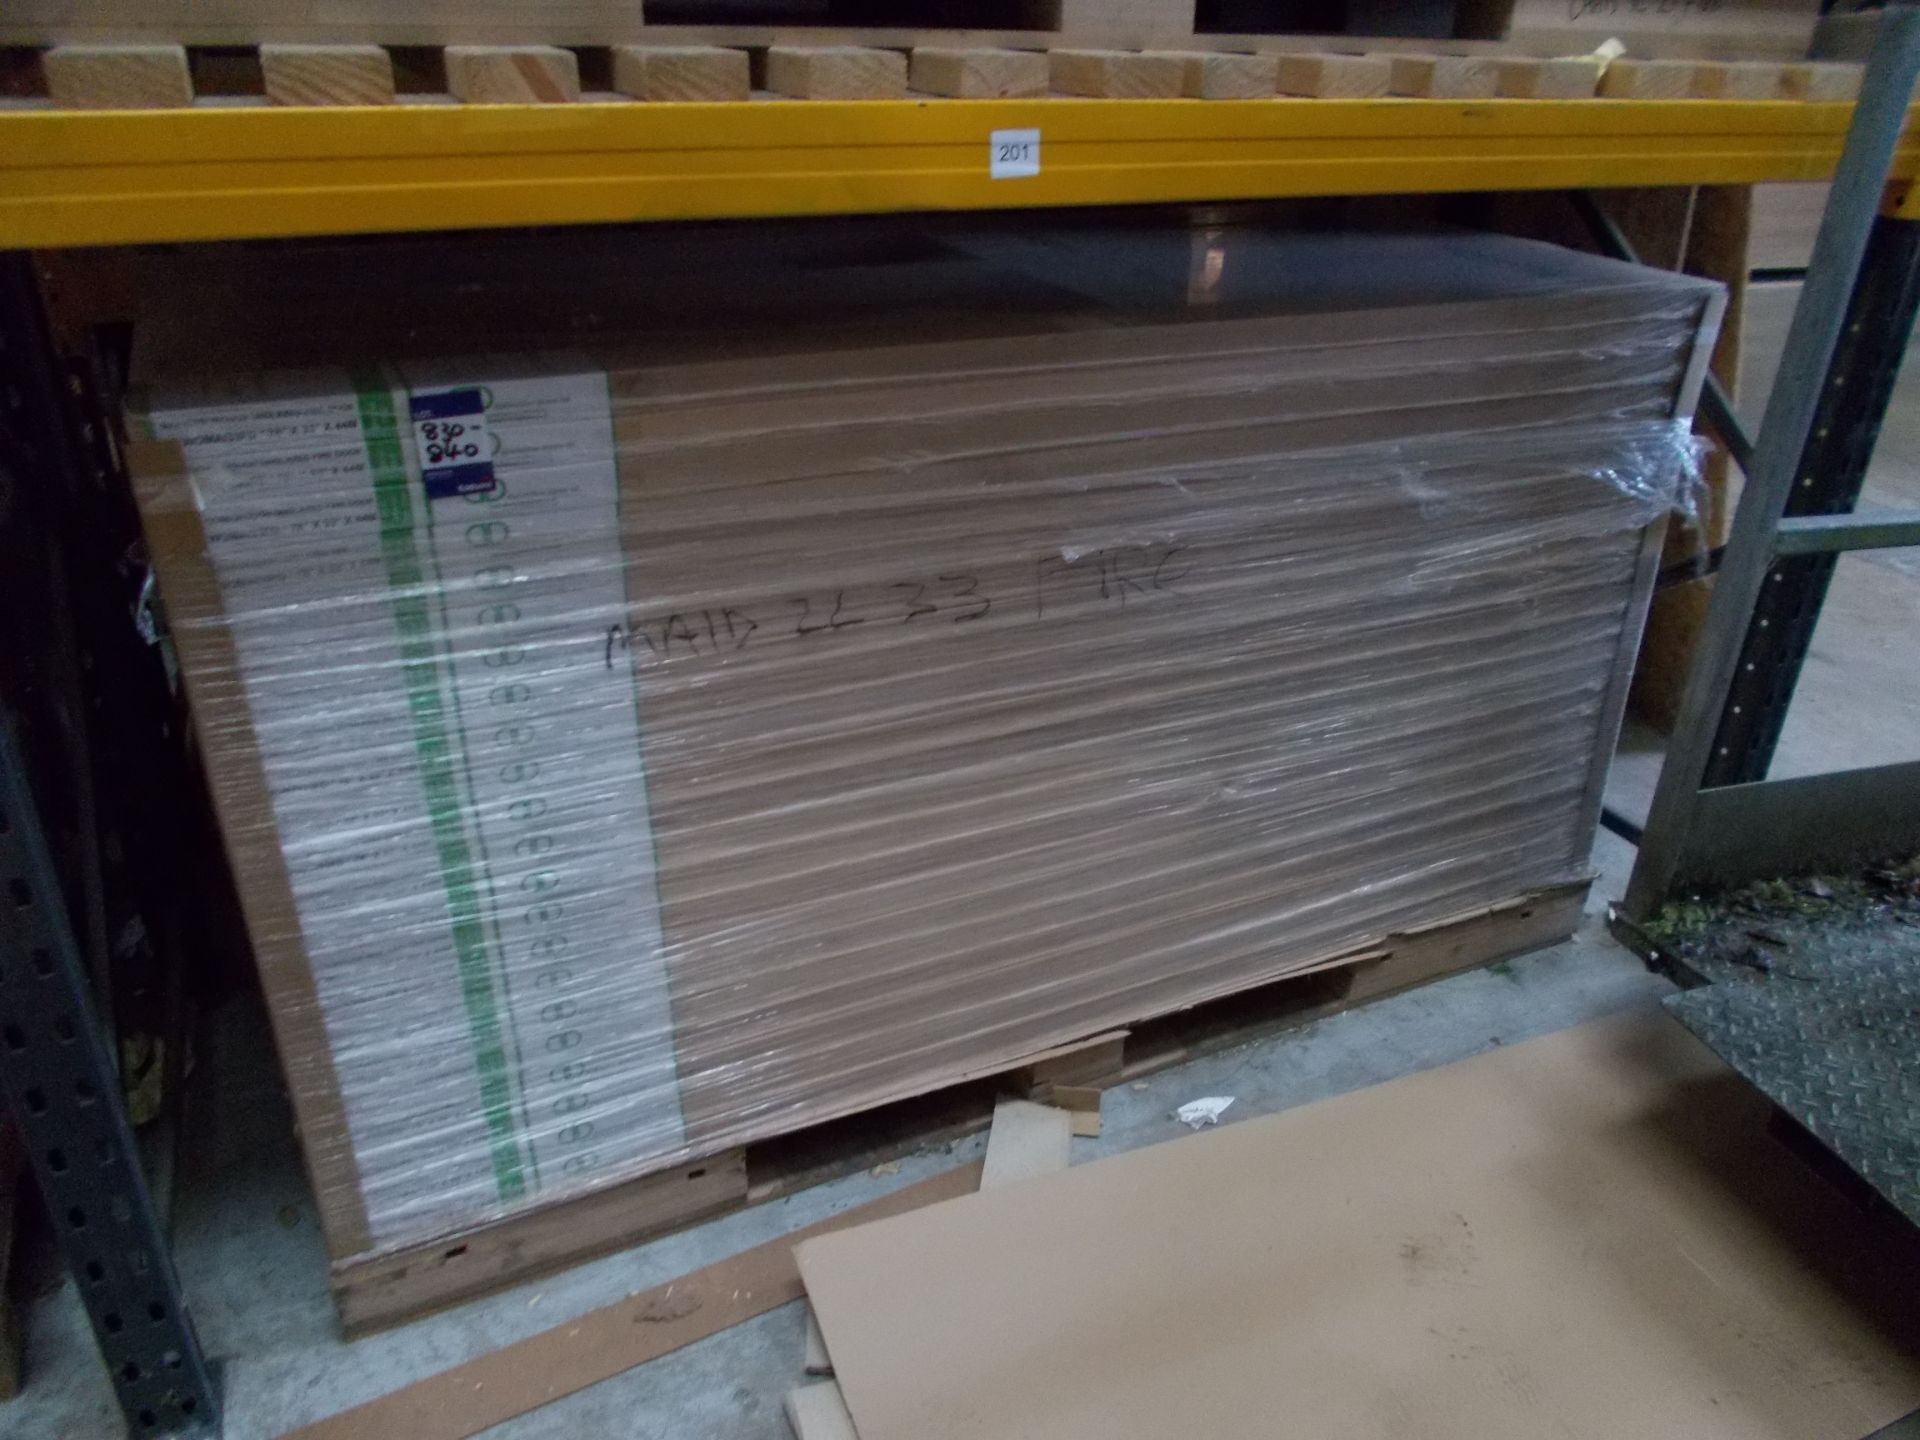 2 x Maidenborough Unglazed Fire Door AWOMA133FD 78”x33”x44mm - Lots to be handed out in order they - Image 2 of 4